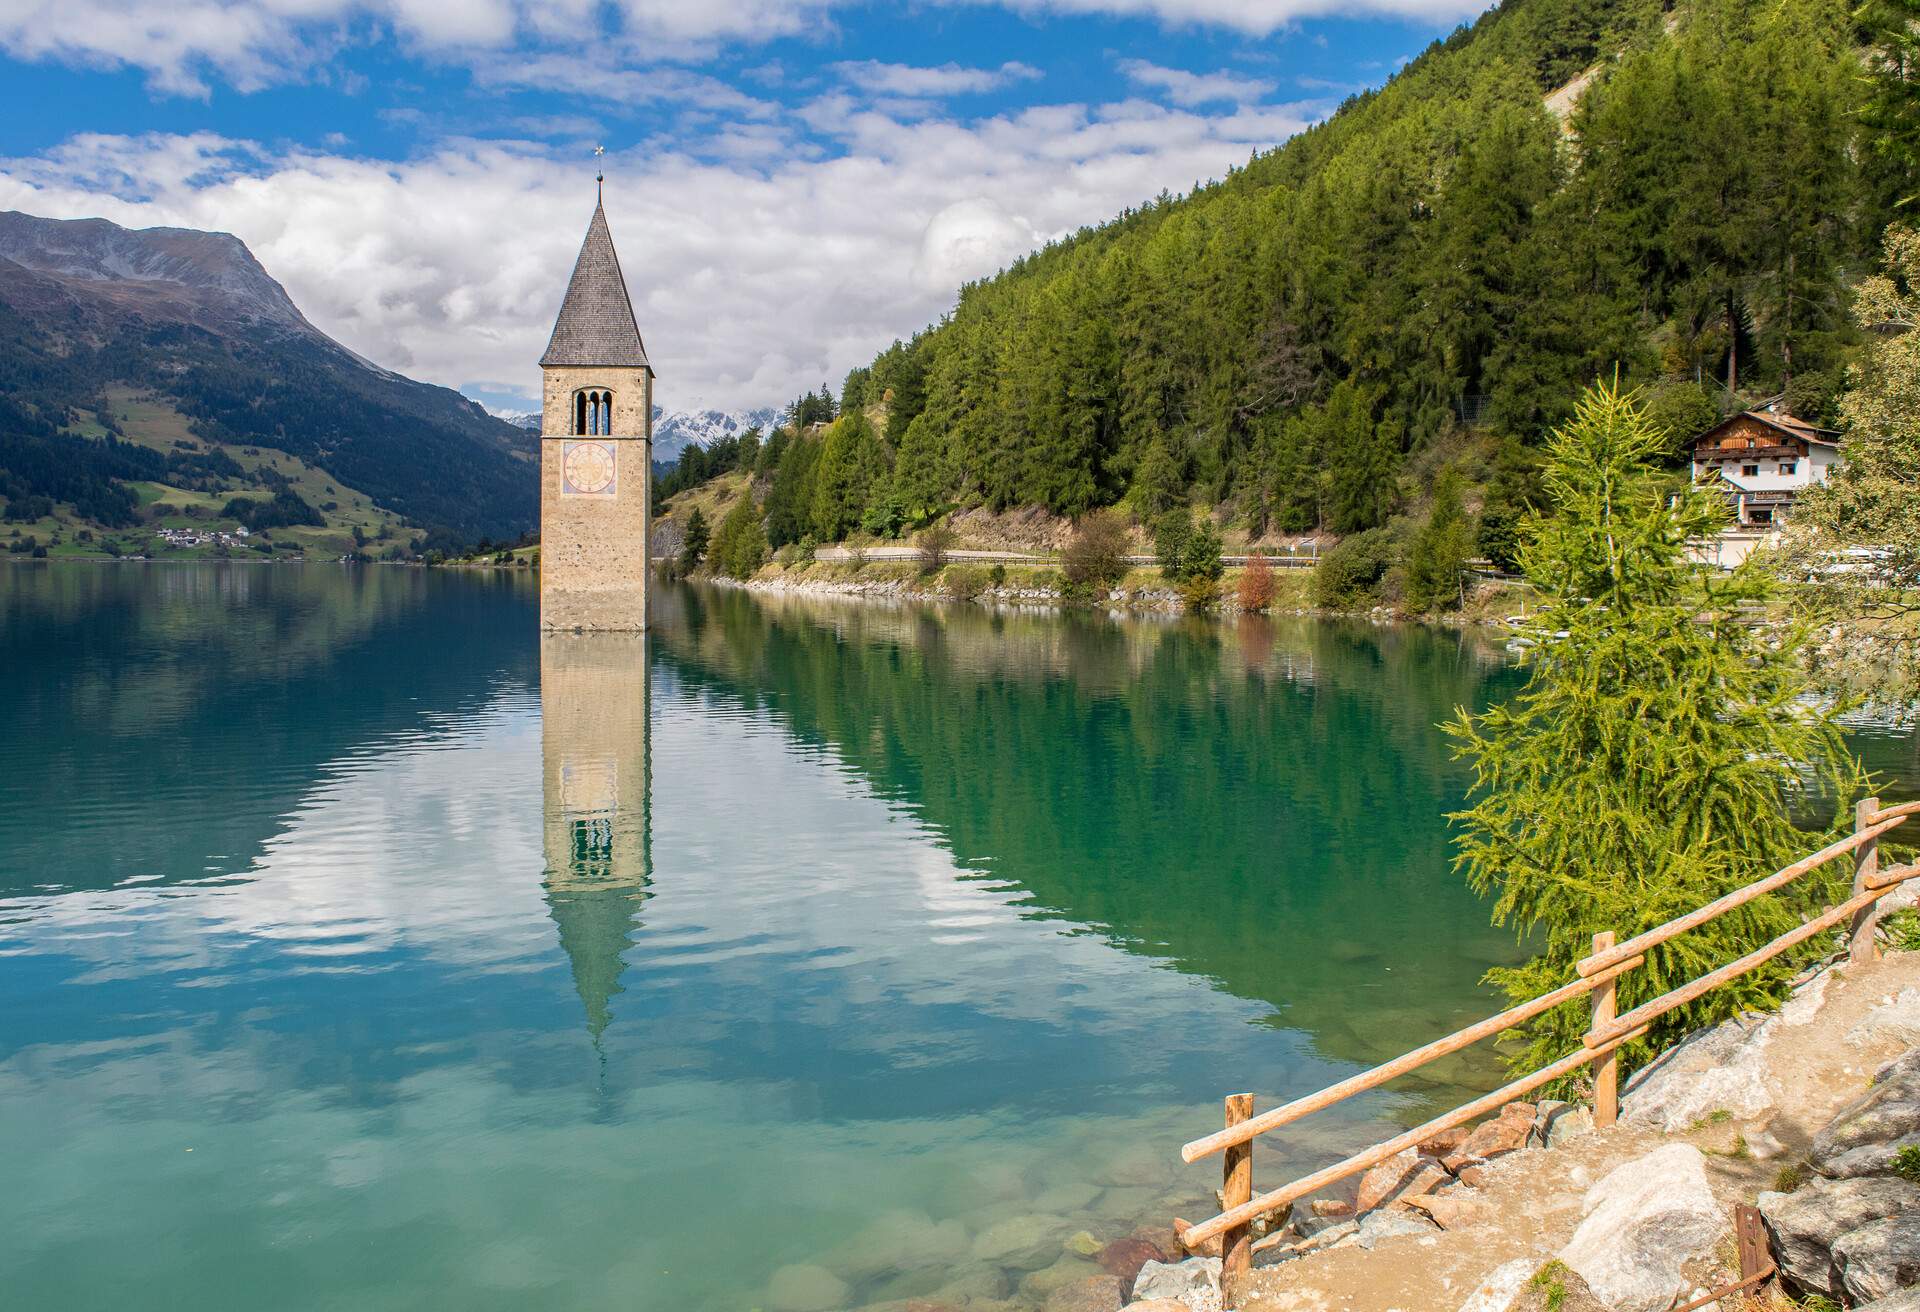 DEST_ITALY_TYROL_LAKE-RESIA-GettyImages-1257981536